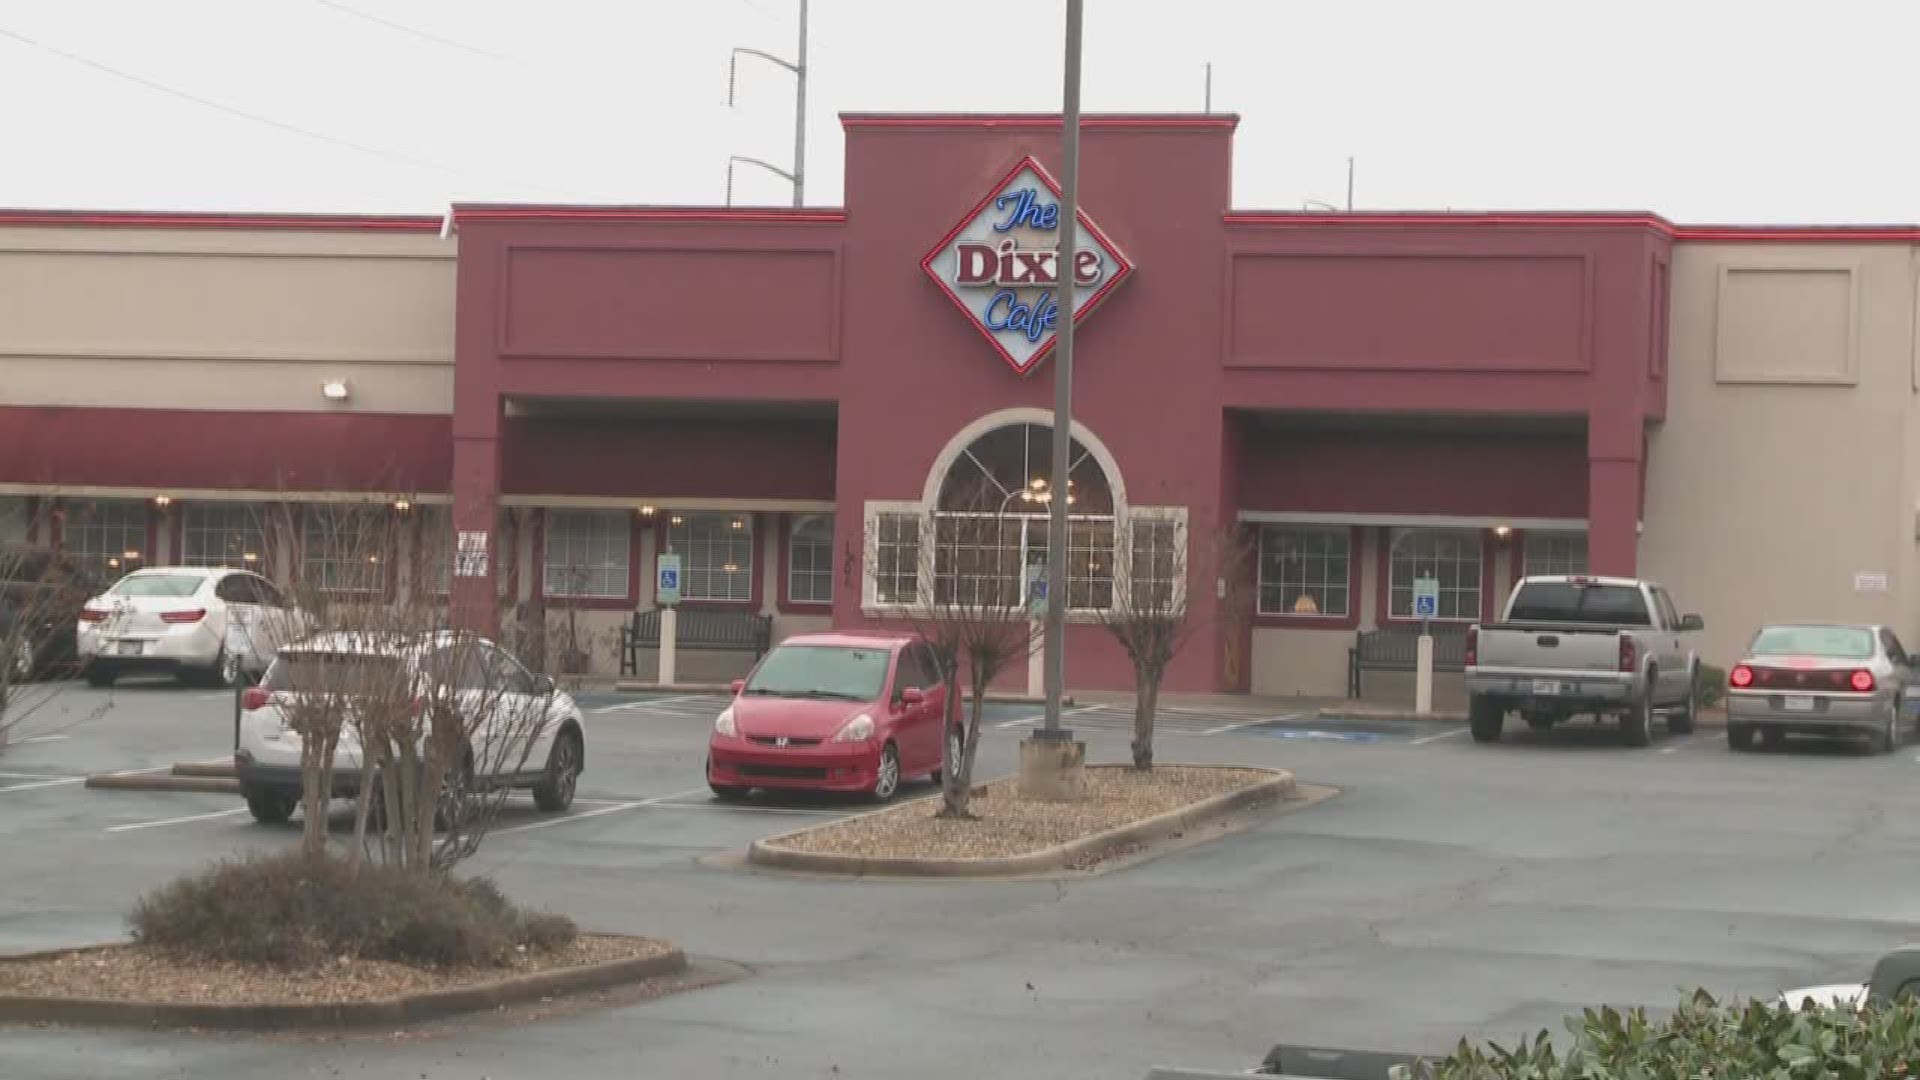 Businesses help after Dixie Cafe closings